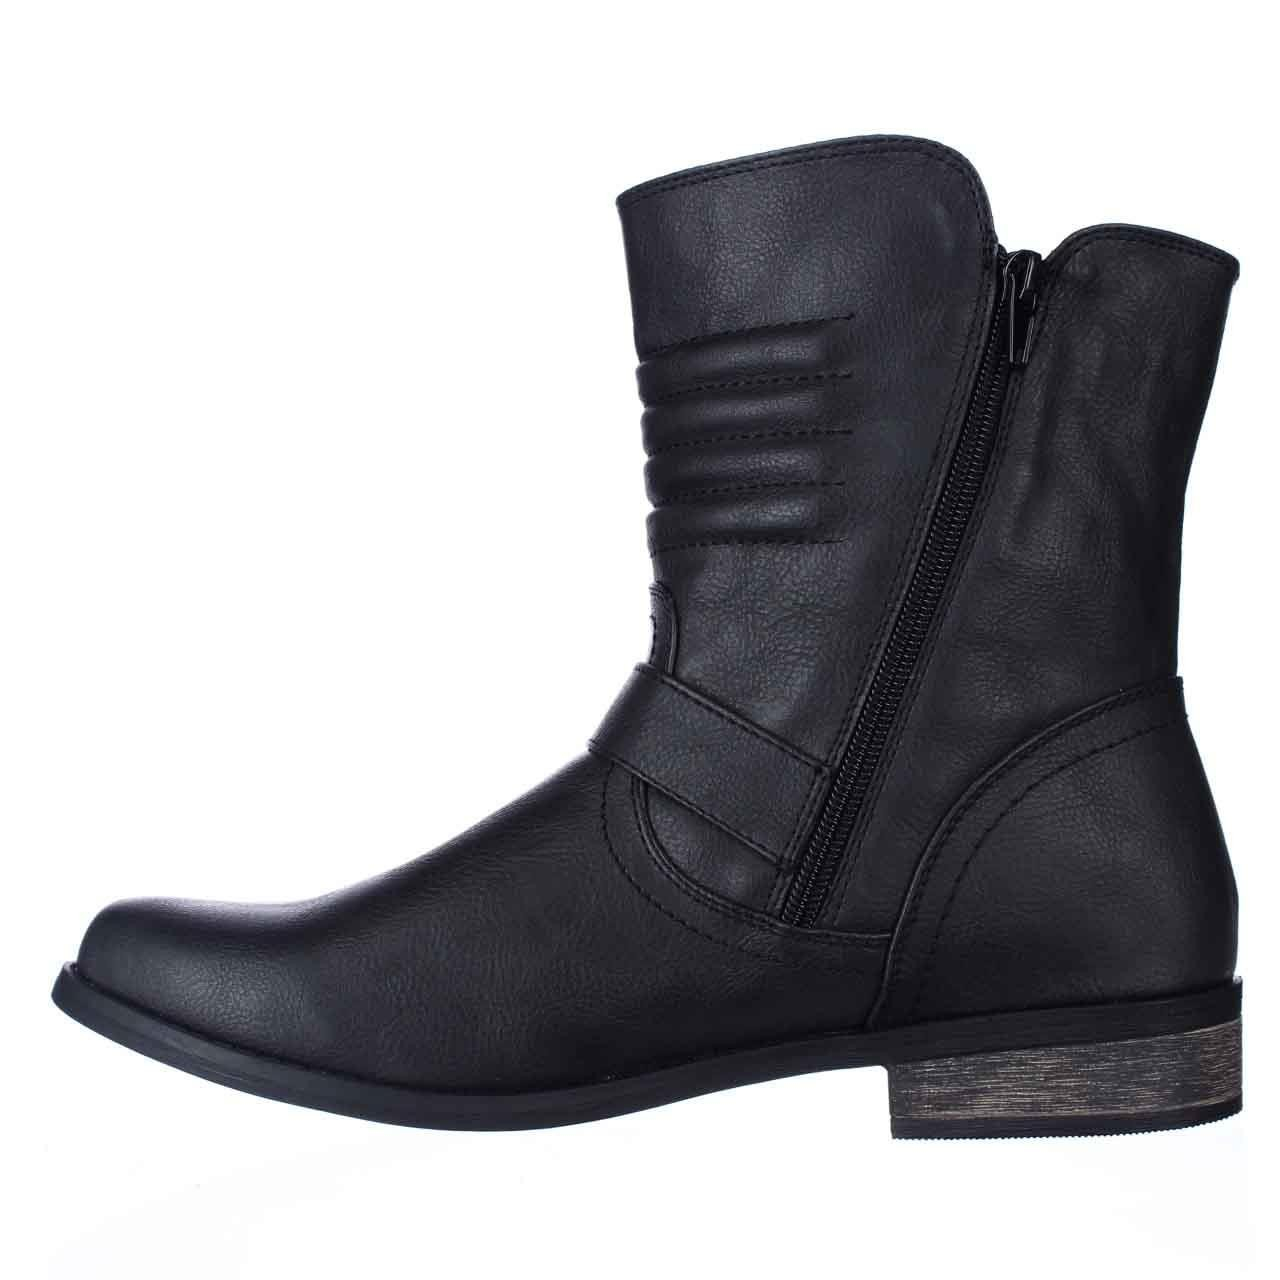 Lyst - Rampage Imani Flat Casual Boots in Black